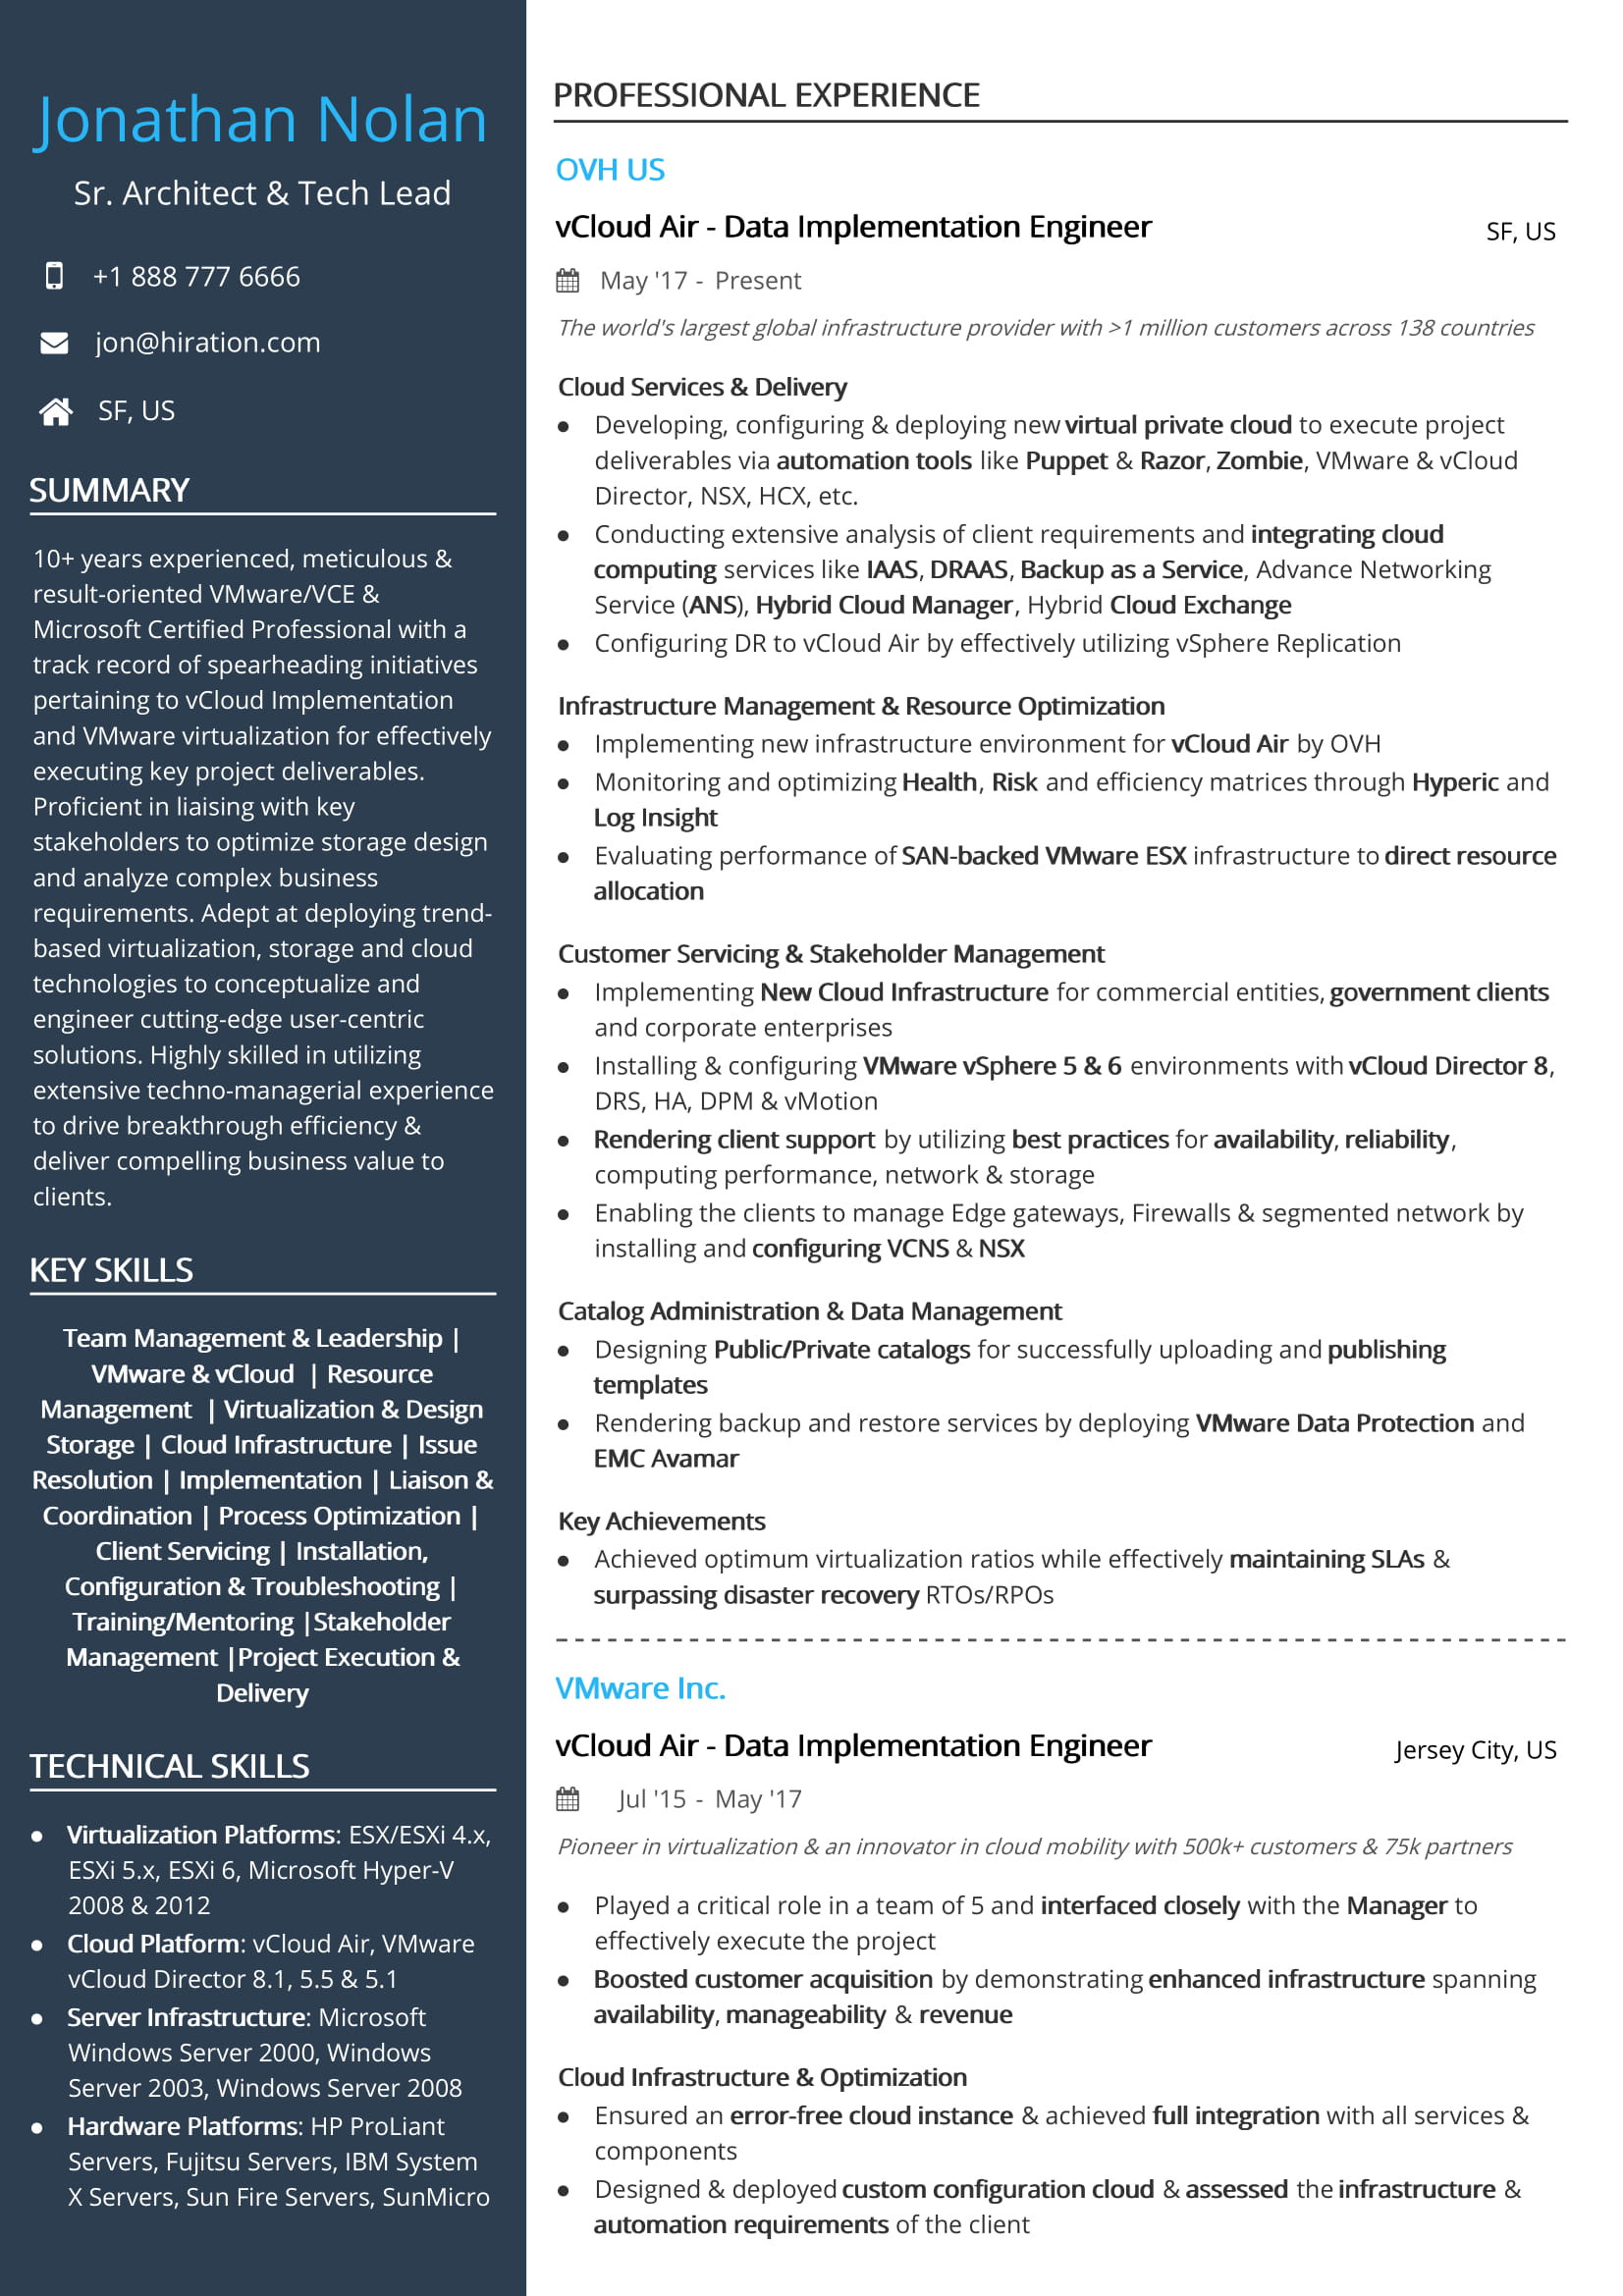 Sample Of Ibm Resume for Vmware Free Senior Architect and Tech Lead Resume Sample 2020 by Hiration